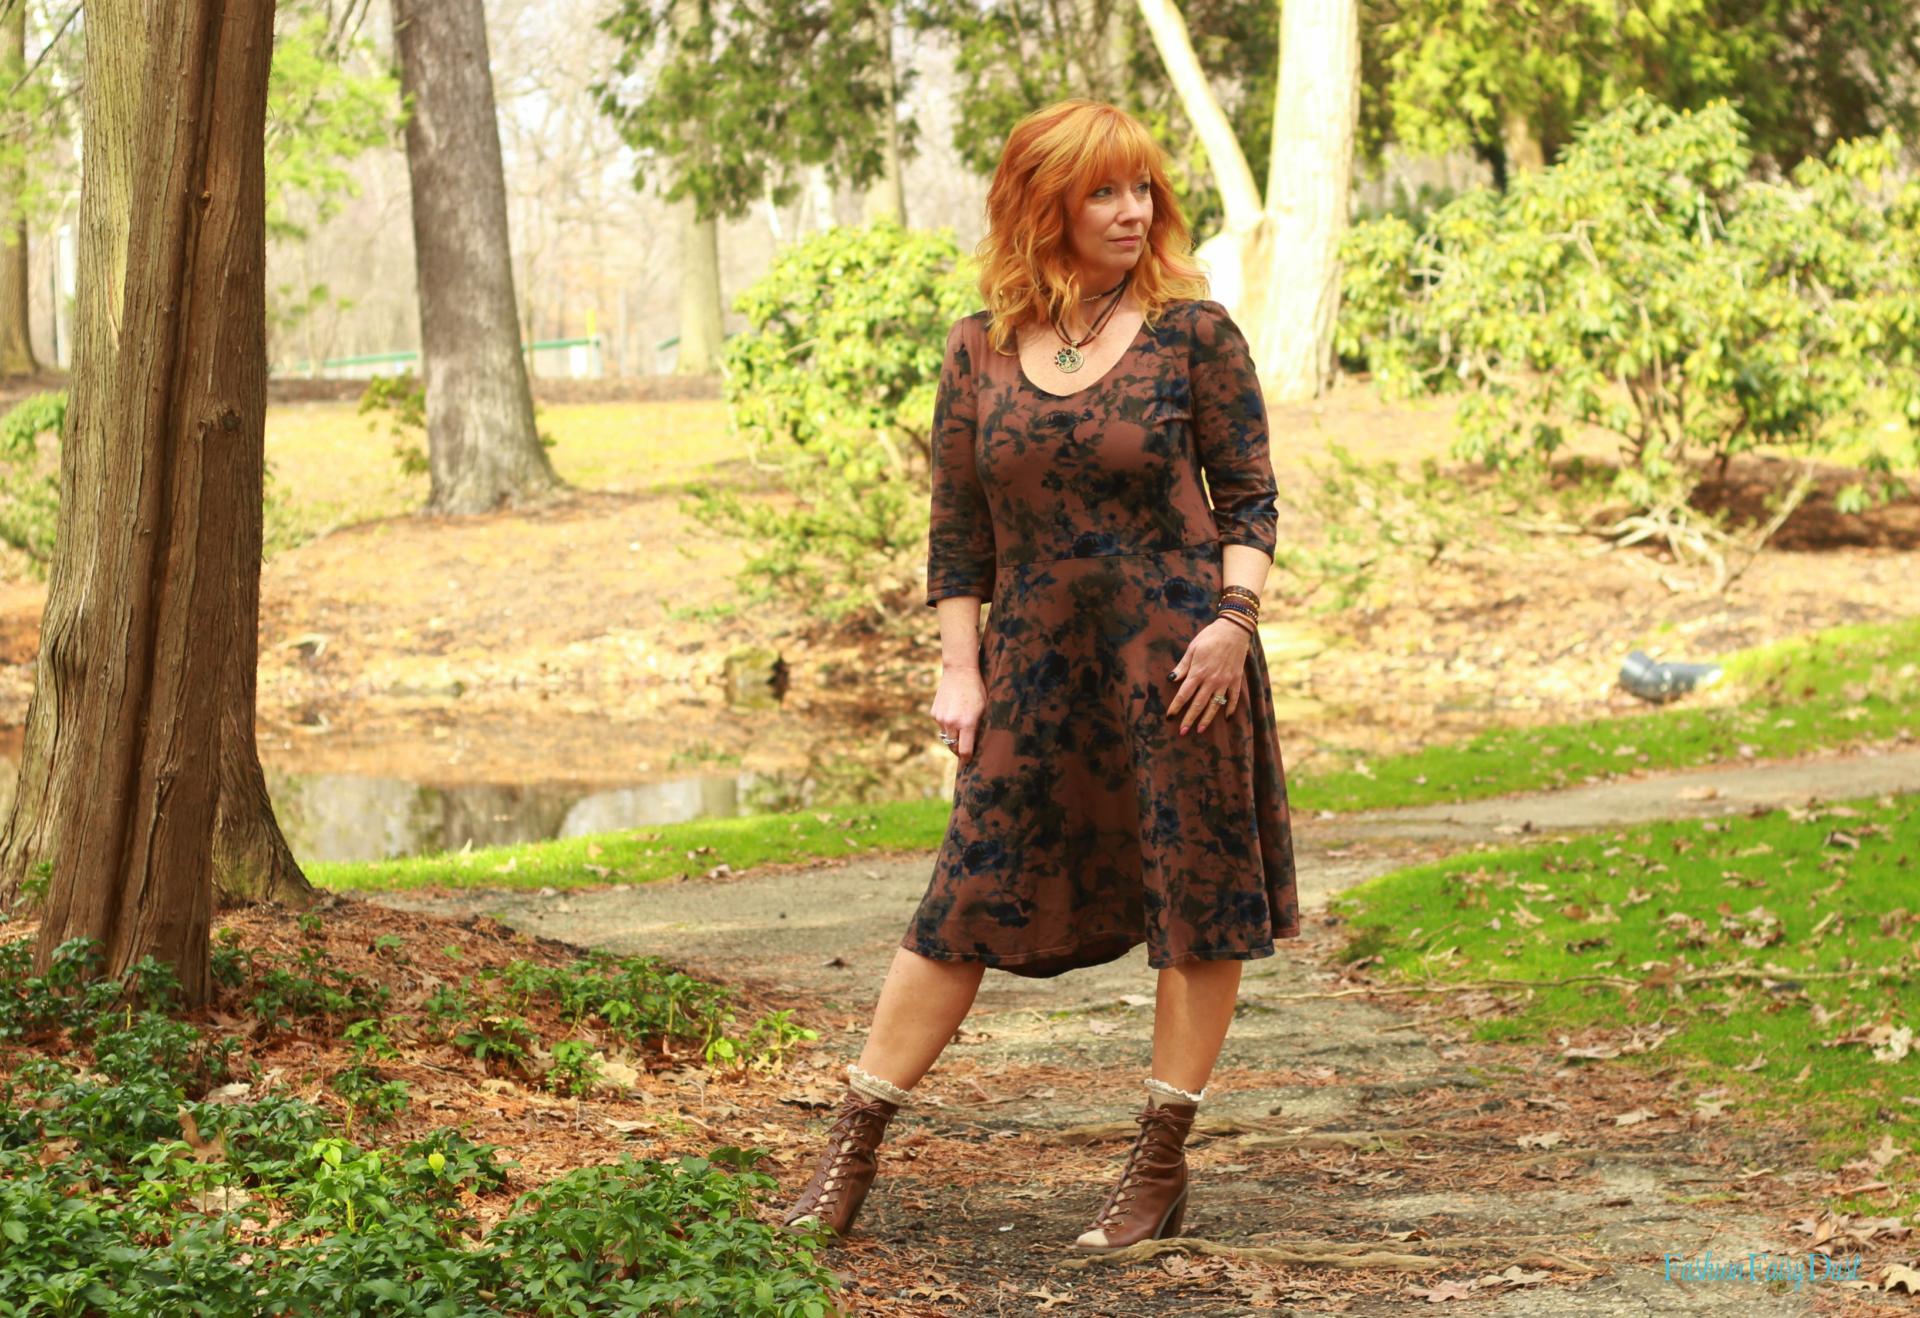 Floral print dress, peep toe ankle boots and socks. How to style open toe shoes with socks.